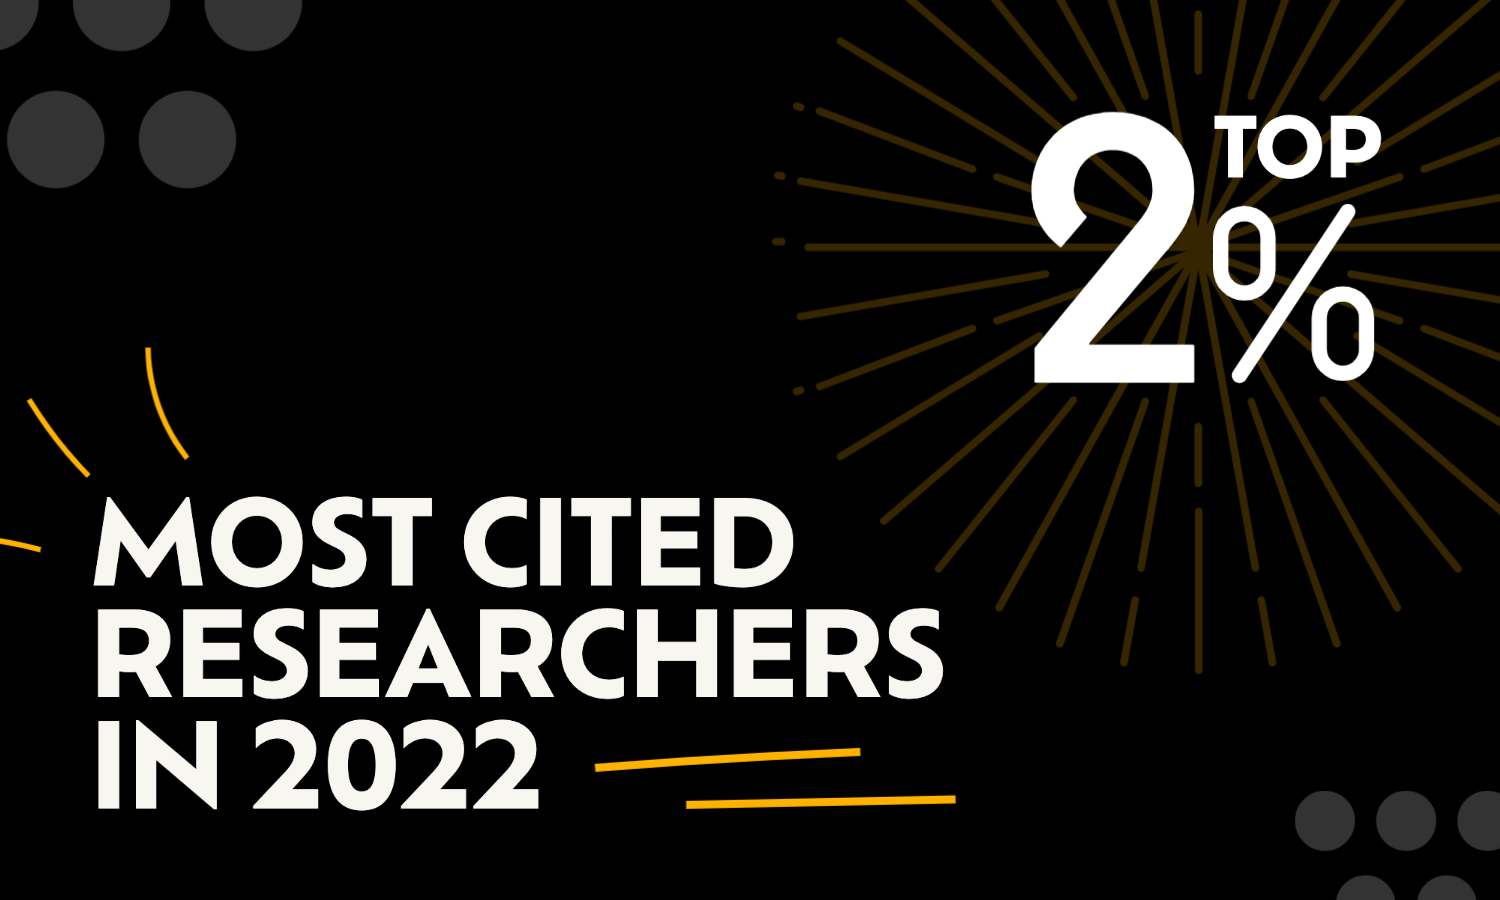 Top 2 percent most cited researchers in 2022